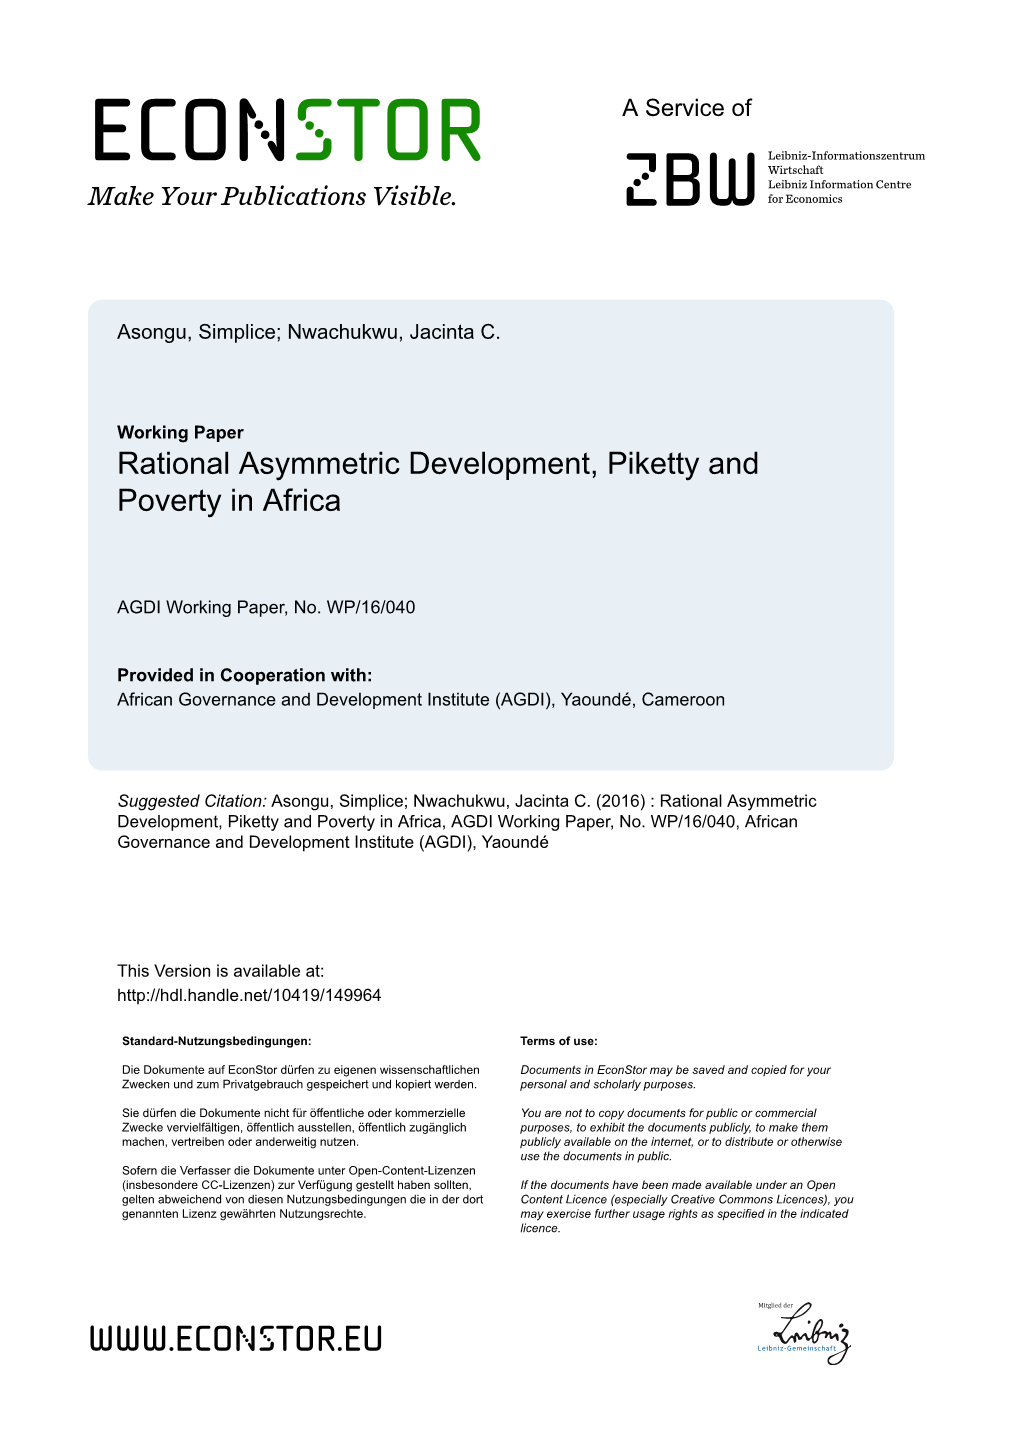 Rational Asymmetric Development, Piketty and Poverty in Africa